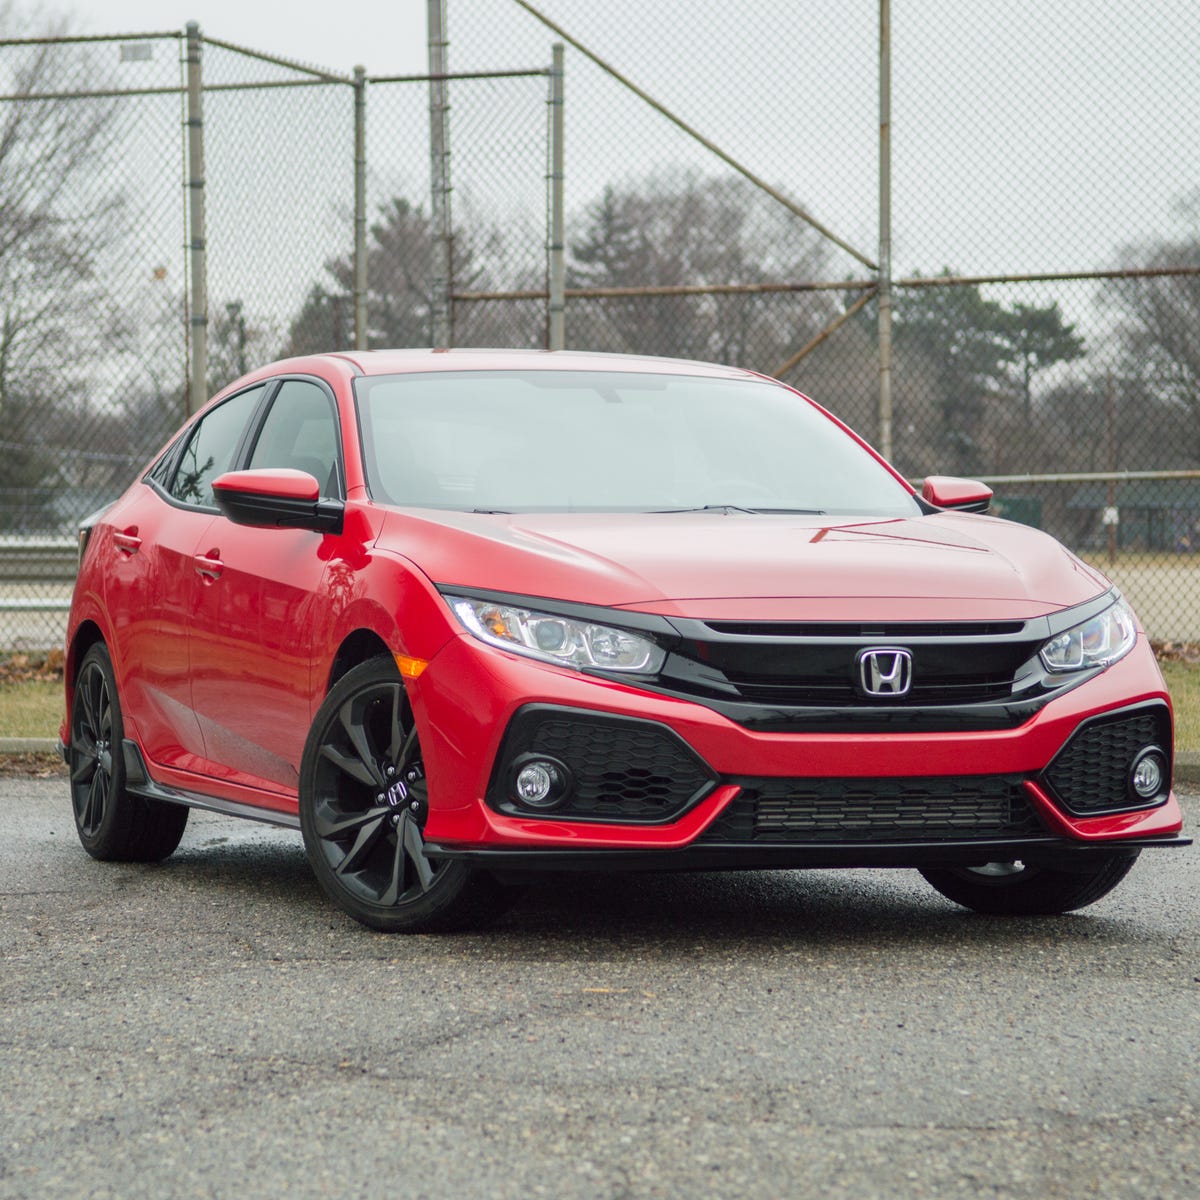 2017 Honda Civic Hatchback review: A driver's car once again - CNET